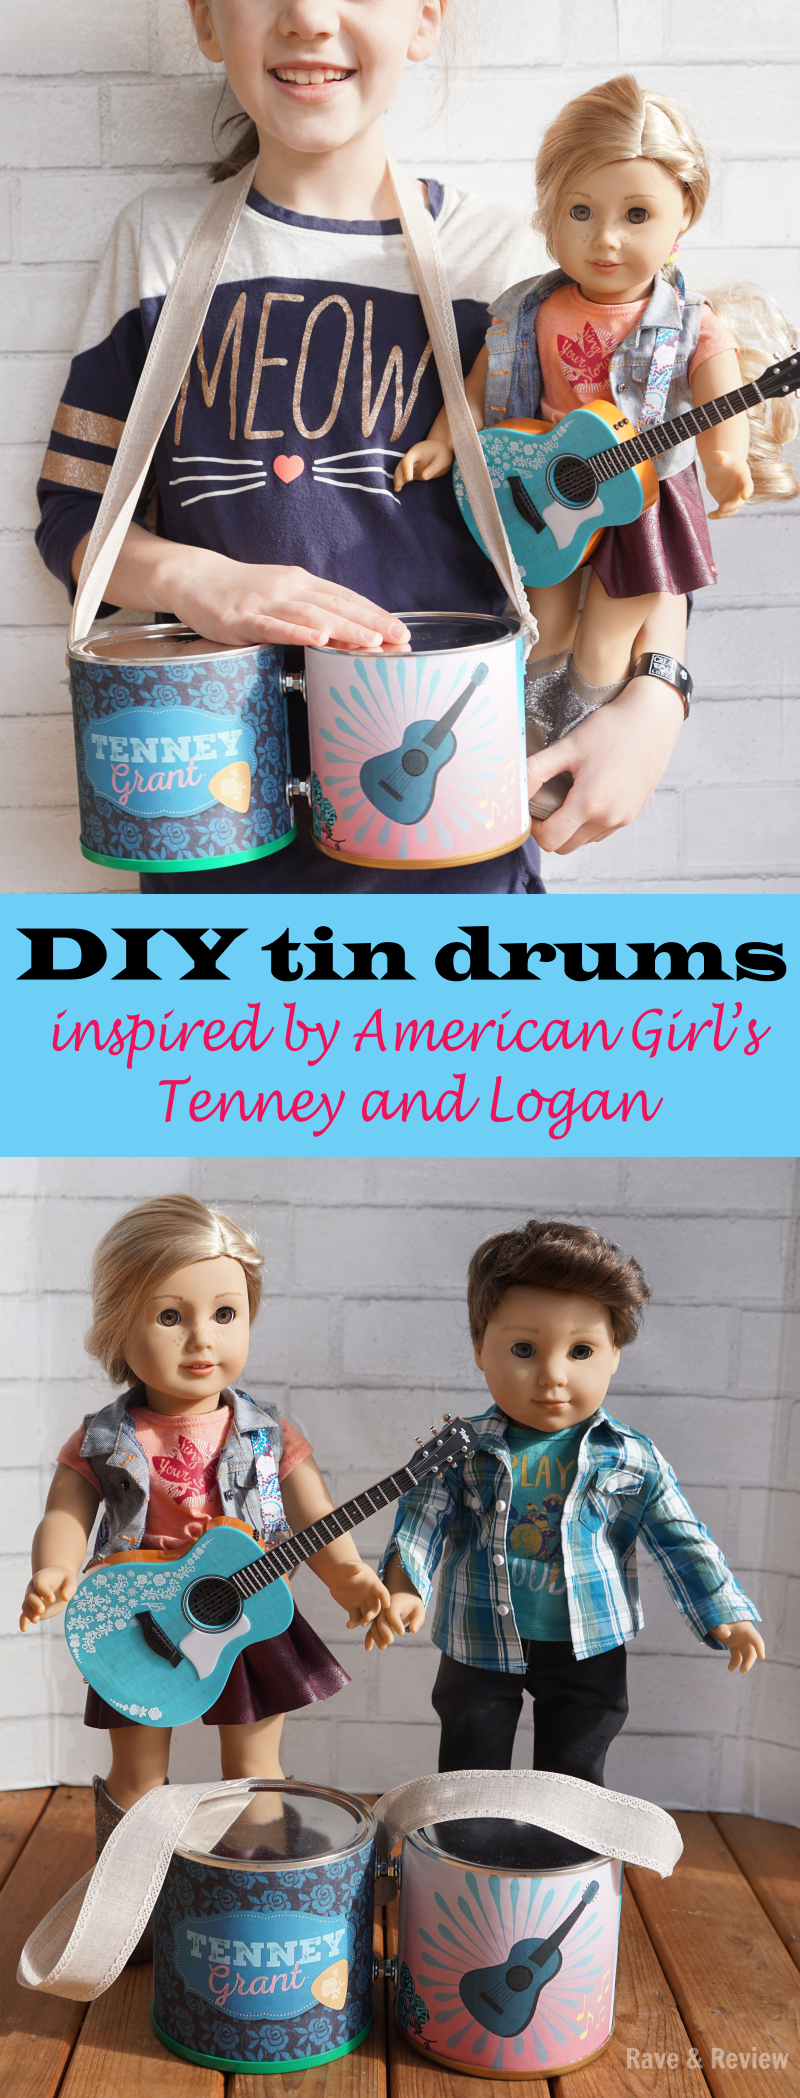 DIY tin drums inspired by American Girl's Tenney and Logan